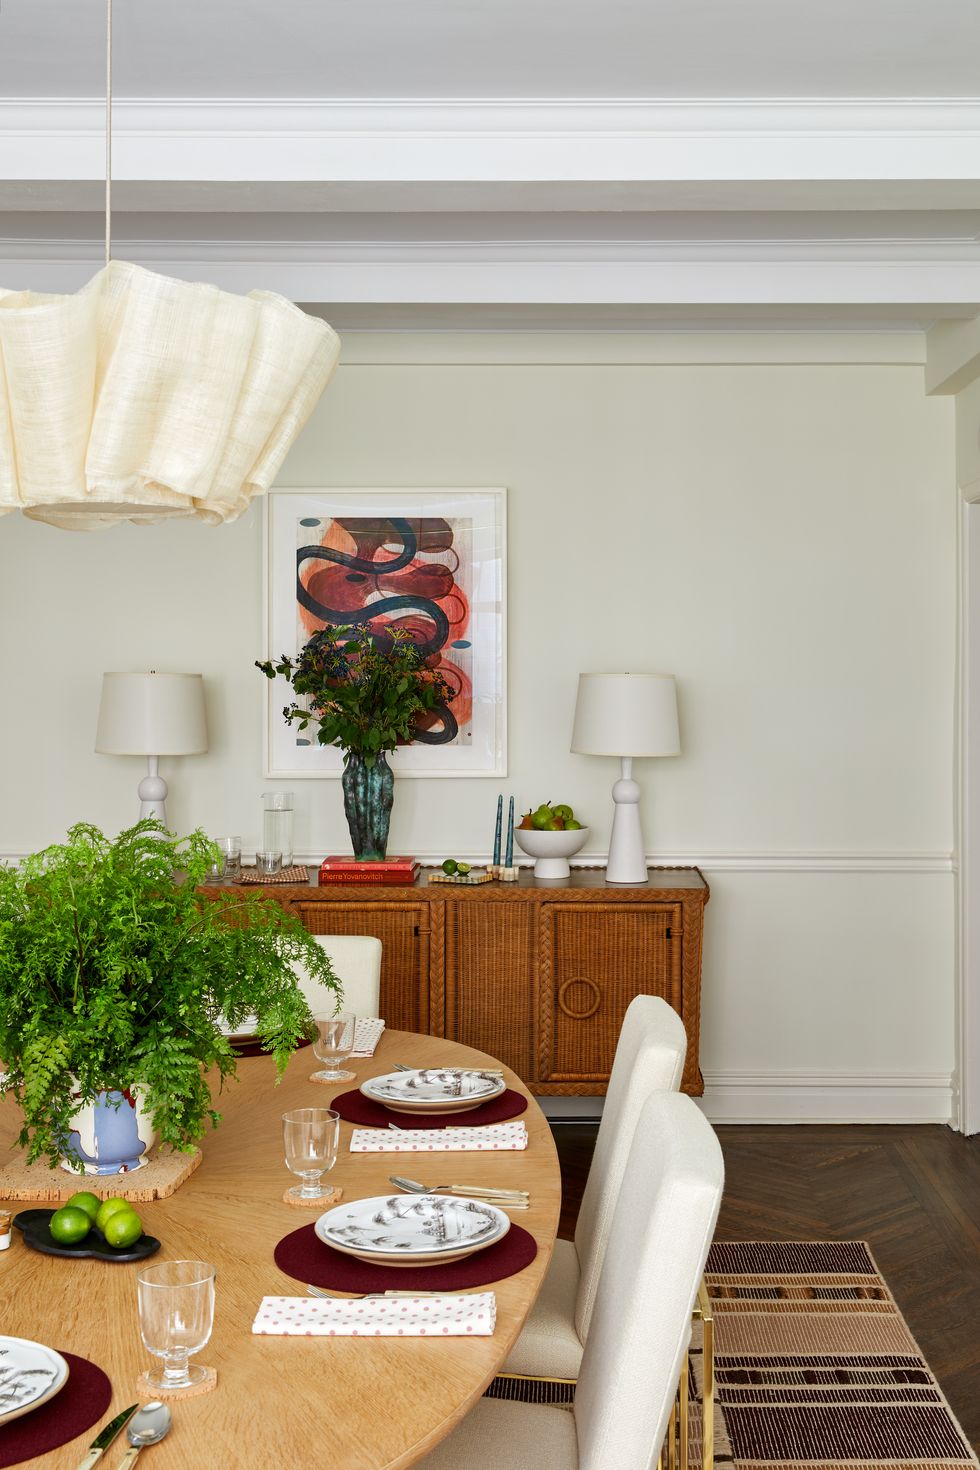 dining room table with place settings below a fabric light fixture